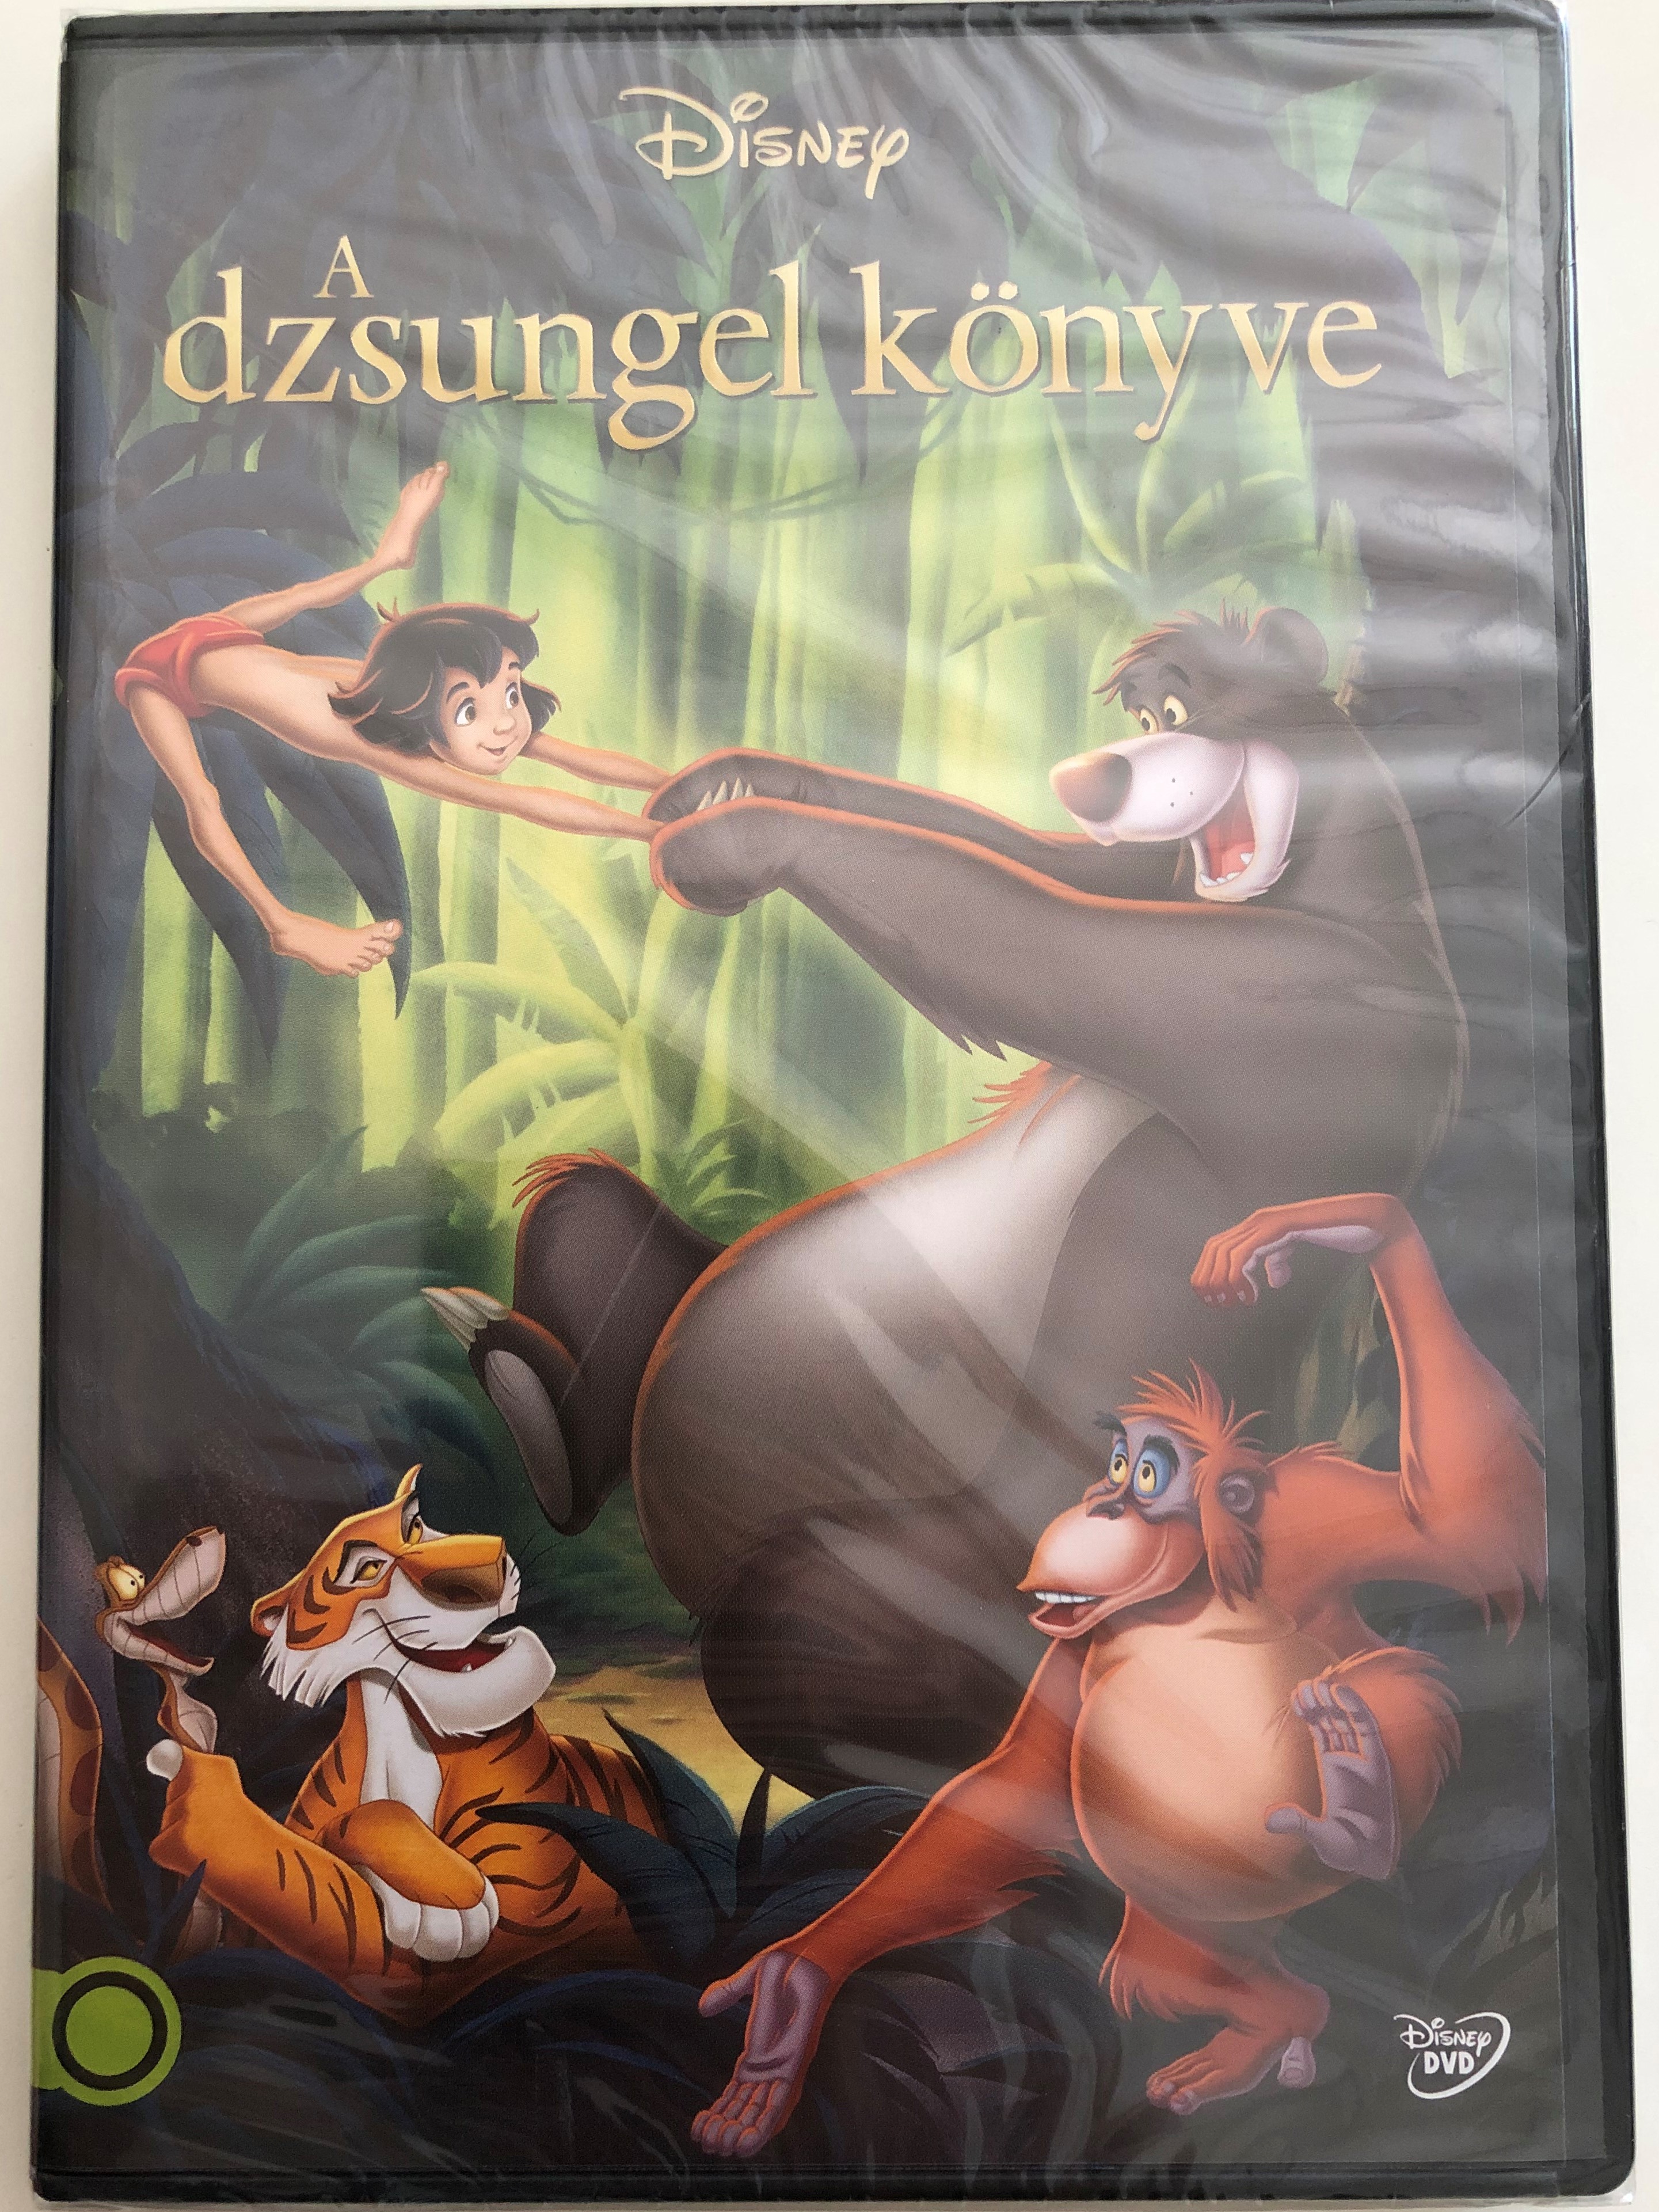 the-jungle-book-dvd-a-dzsungel-k-nyve-directed-by-wolfgang-reitherman-starring-phil-harris-sebastian-cabot-louis-prima-george-sanders-sterling-holloway-j.-pat-o-malley-bruce-reitherman-disney-classic-animated-movie-1-.jpg